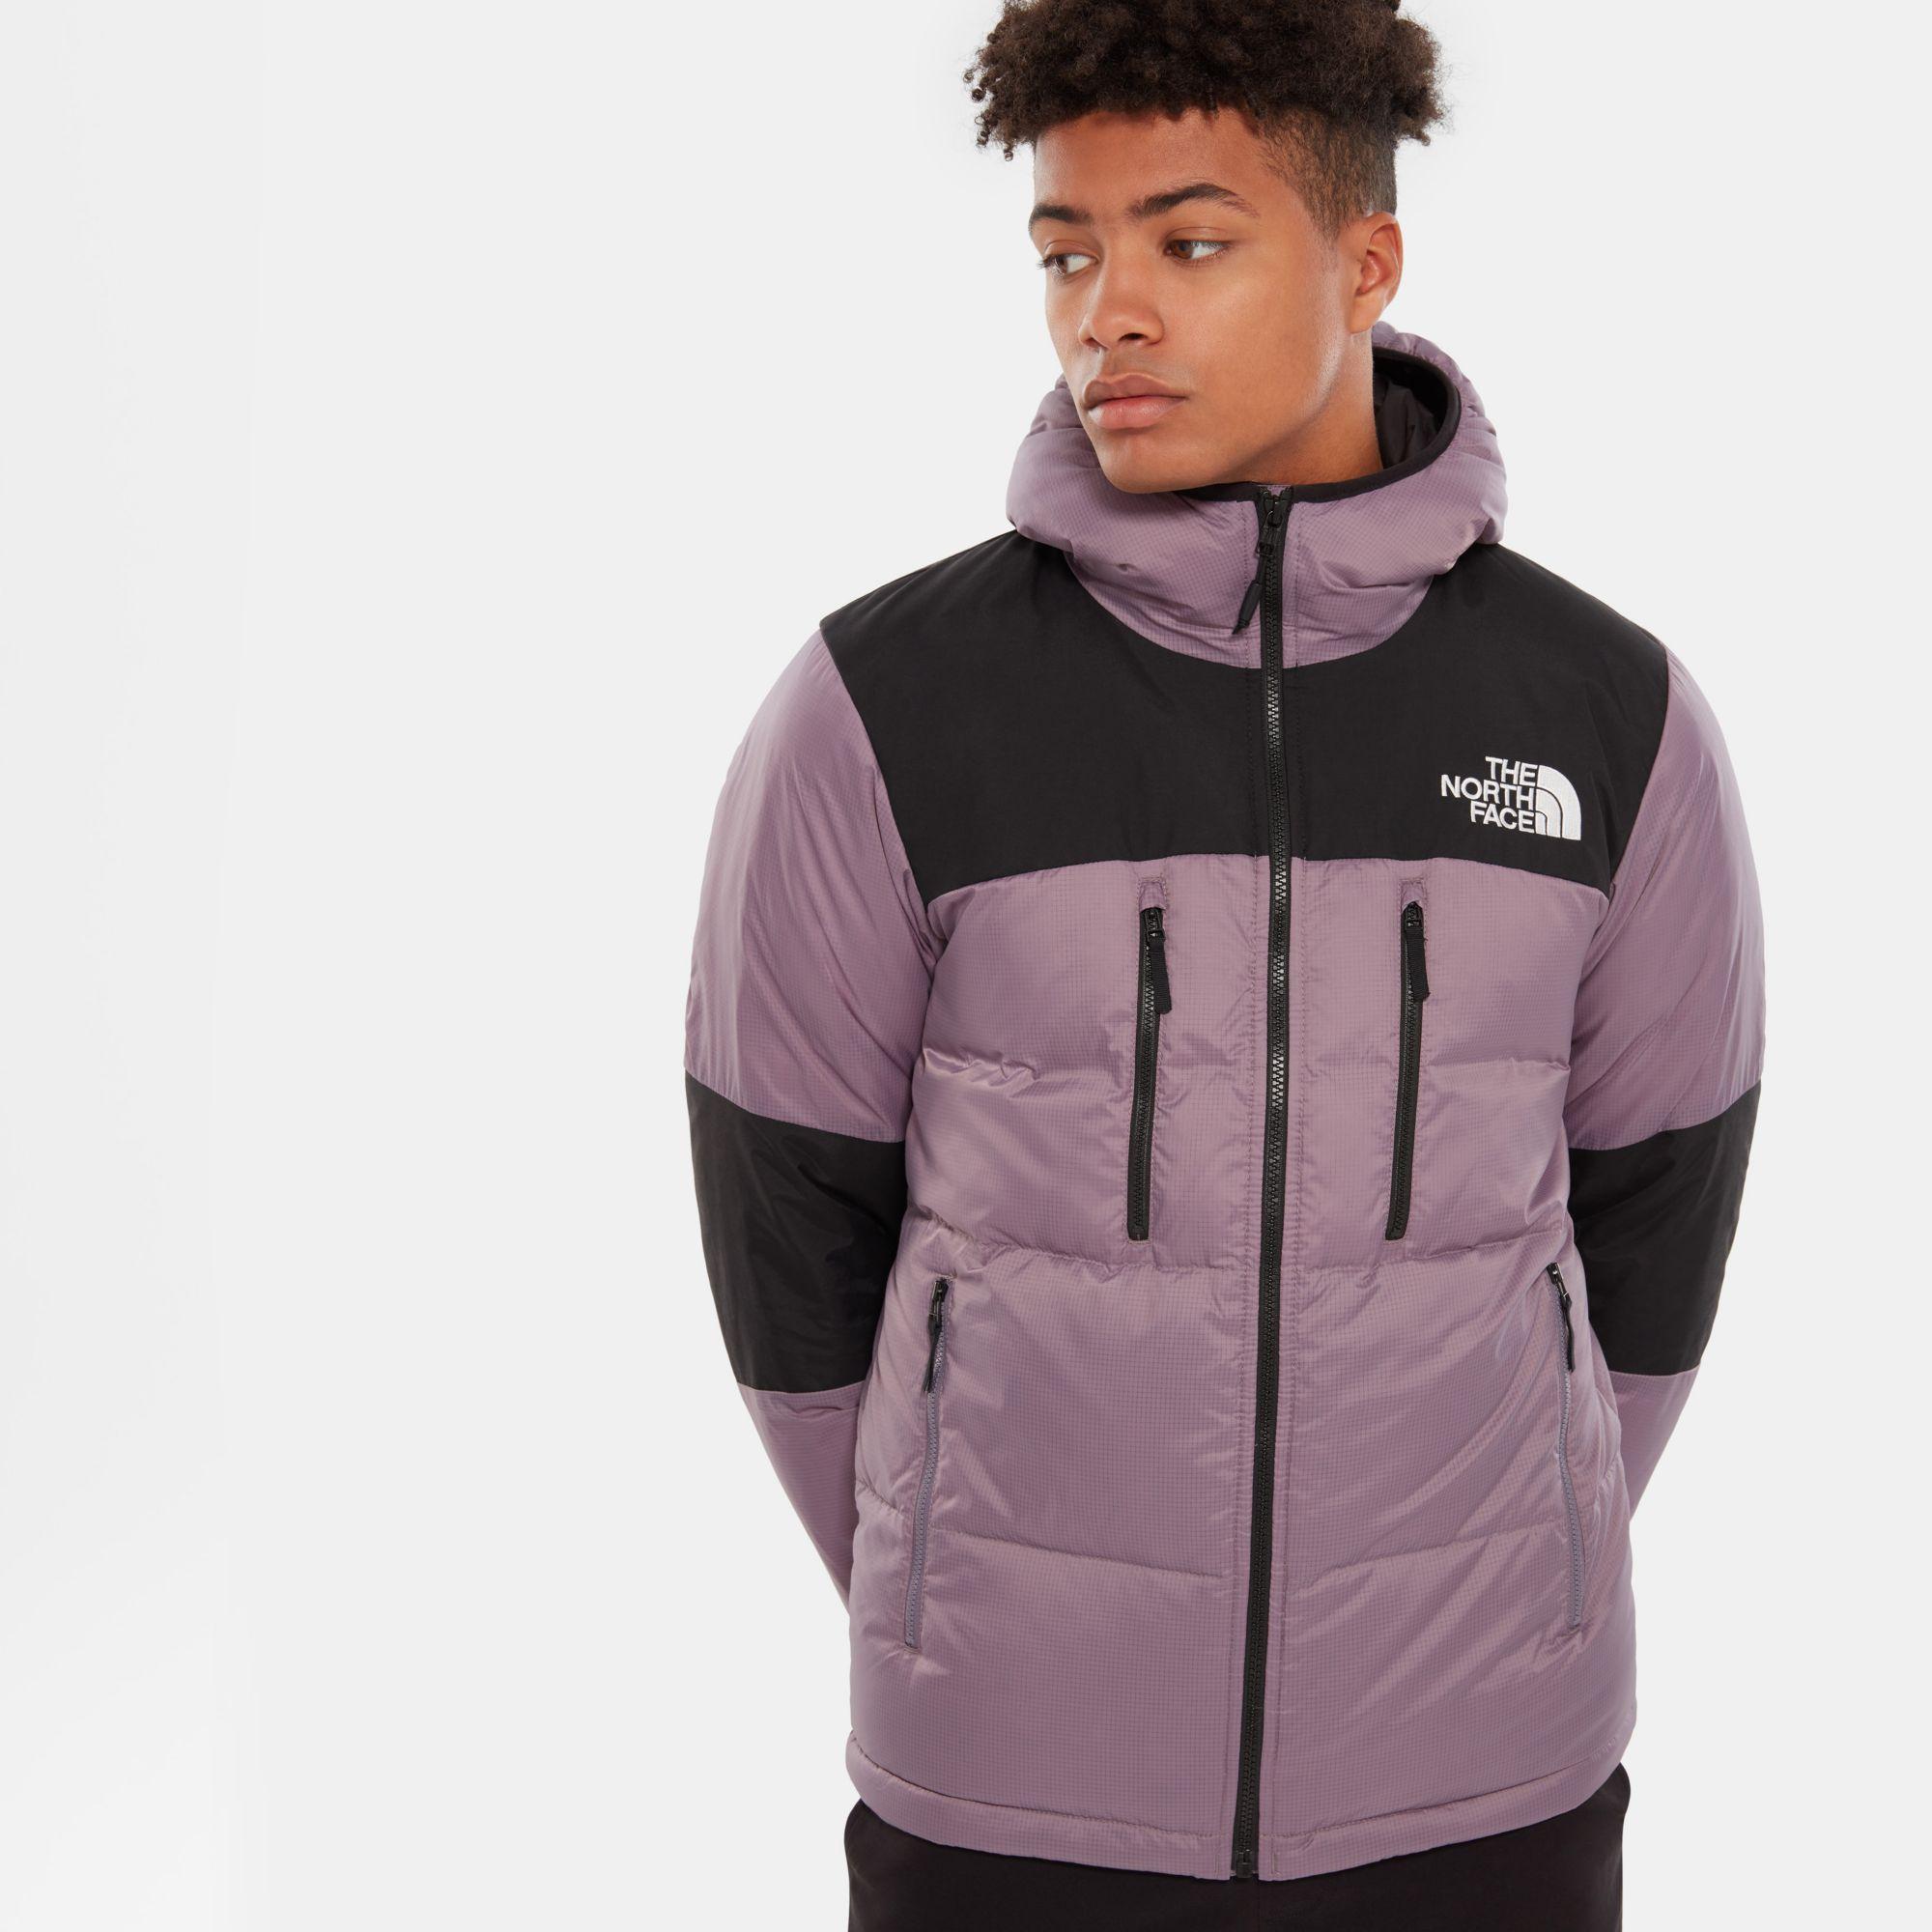 The North Face Himalayan Light Down Hoodie Store, SAVE 45% -  loutzenhiserfuneralhomes.com